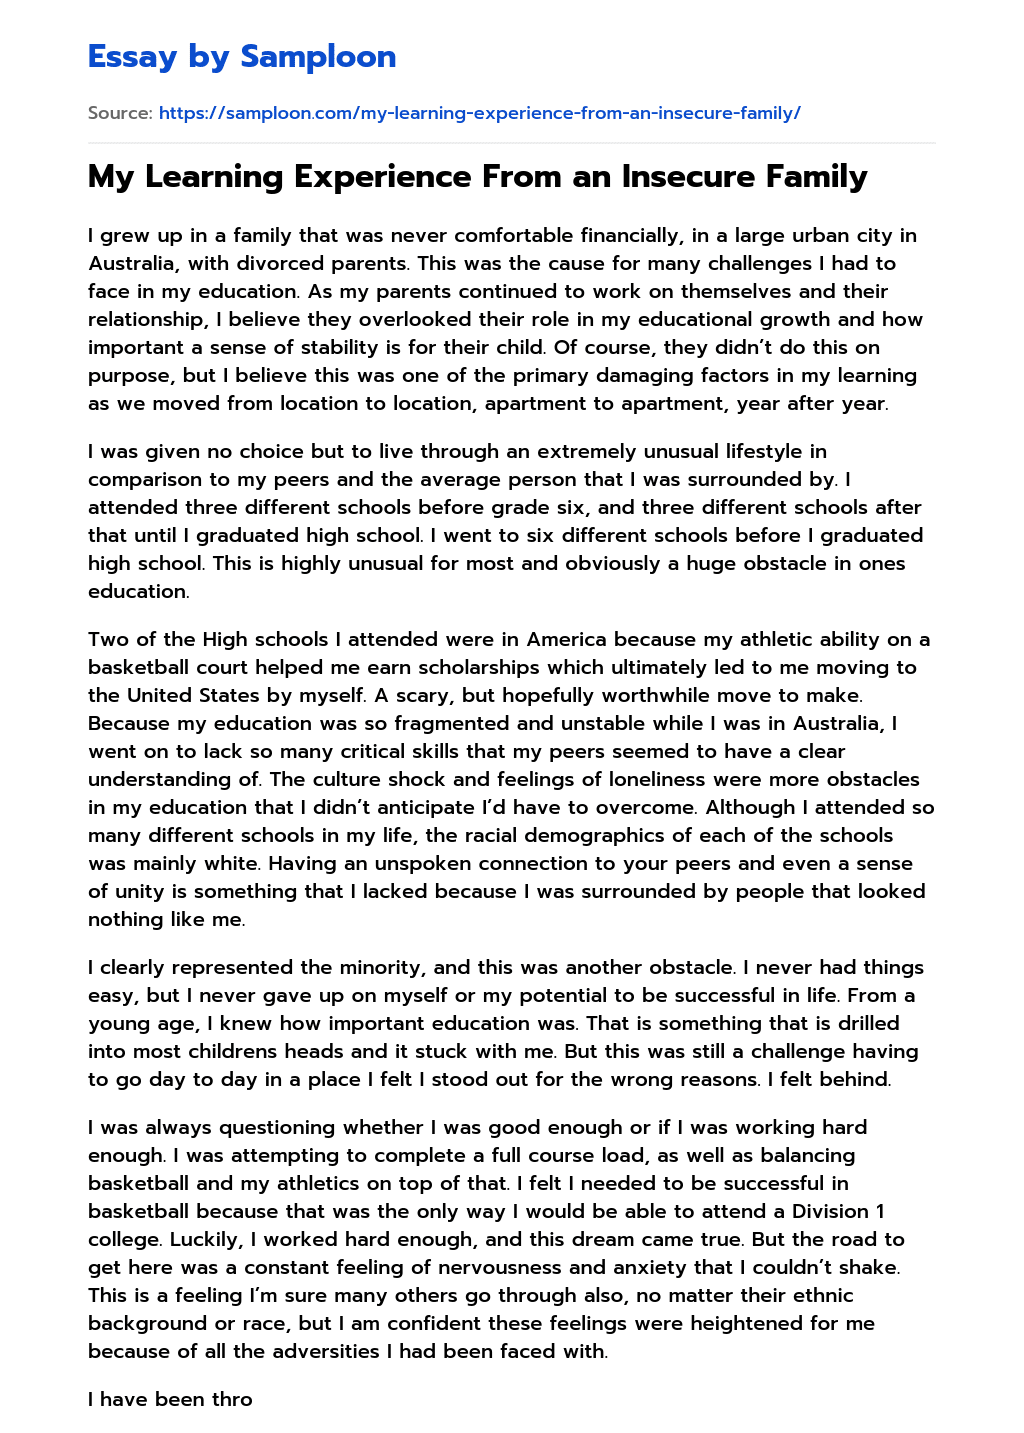 My Learning Experience From an Insecure Family essay